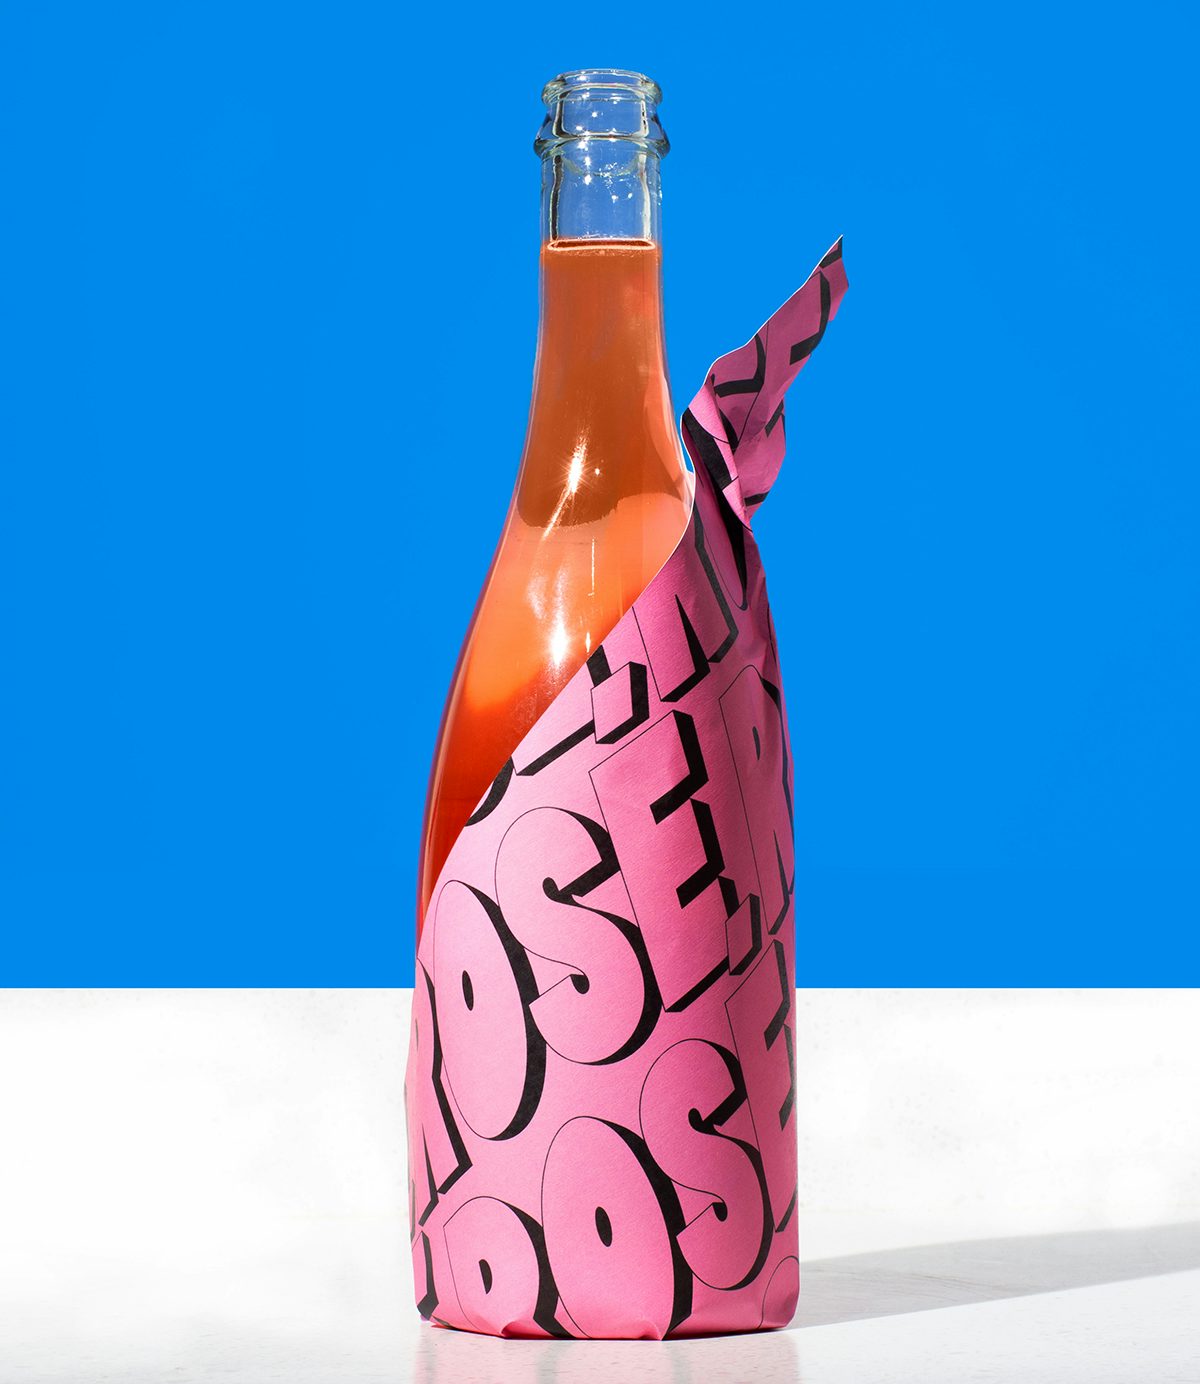 Photograph of a bottle of rosé wine, part of Stompy's branding by &Walsh